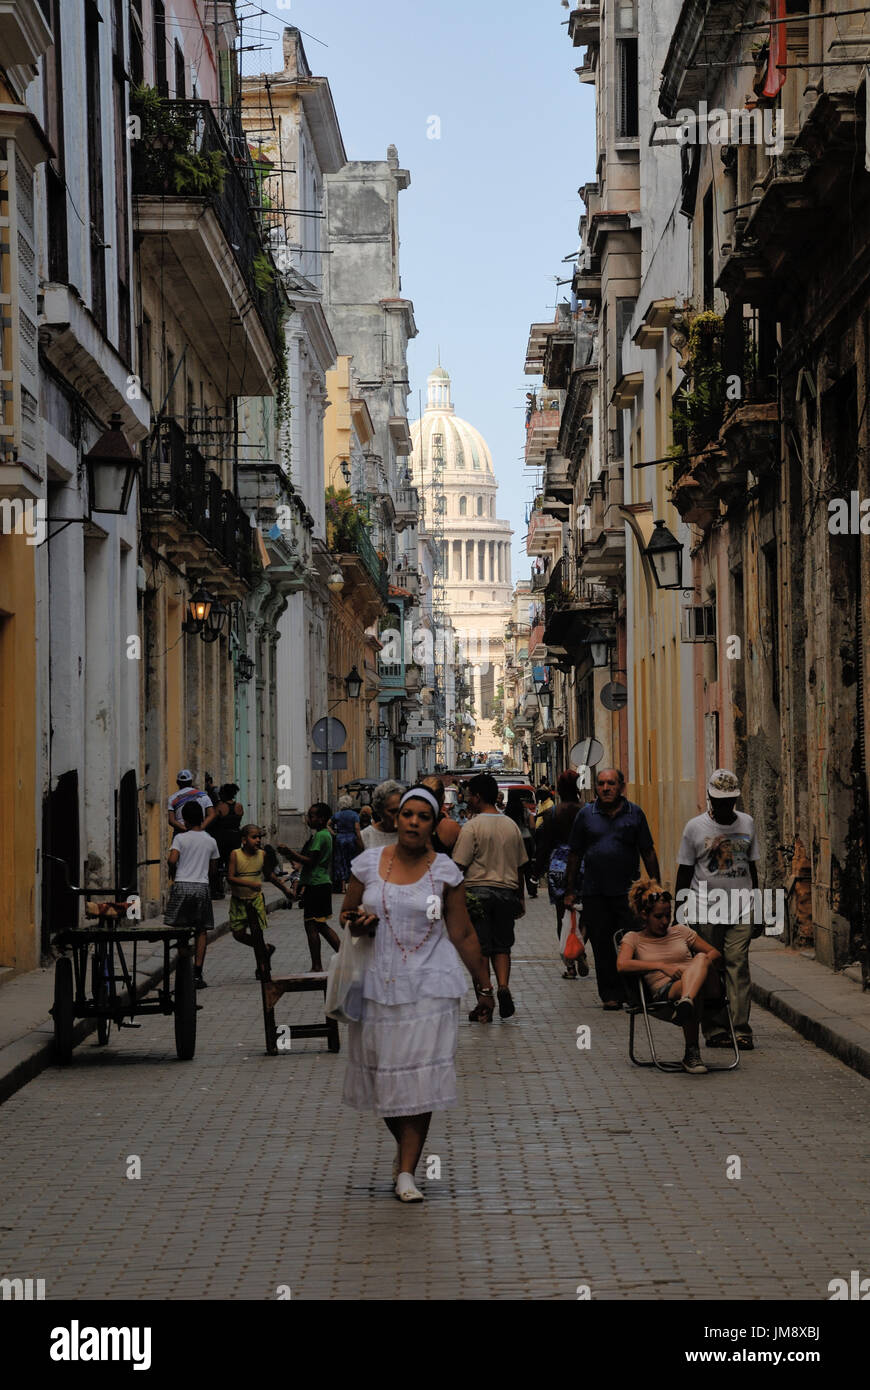 City life in Habana vieja, the old city center of Havana. In the background hints El Capitolio, the seat of the old Cuban parliament. Stock Photo